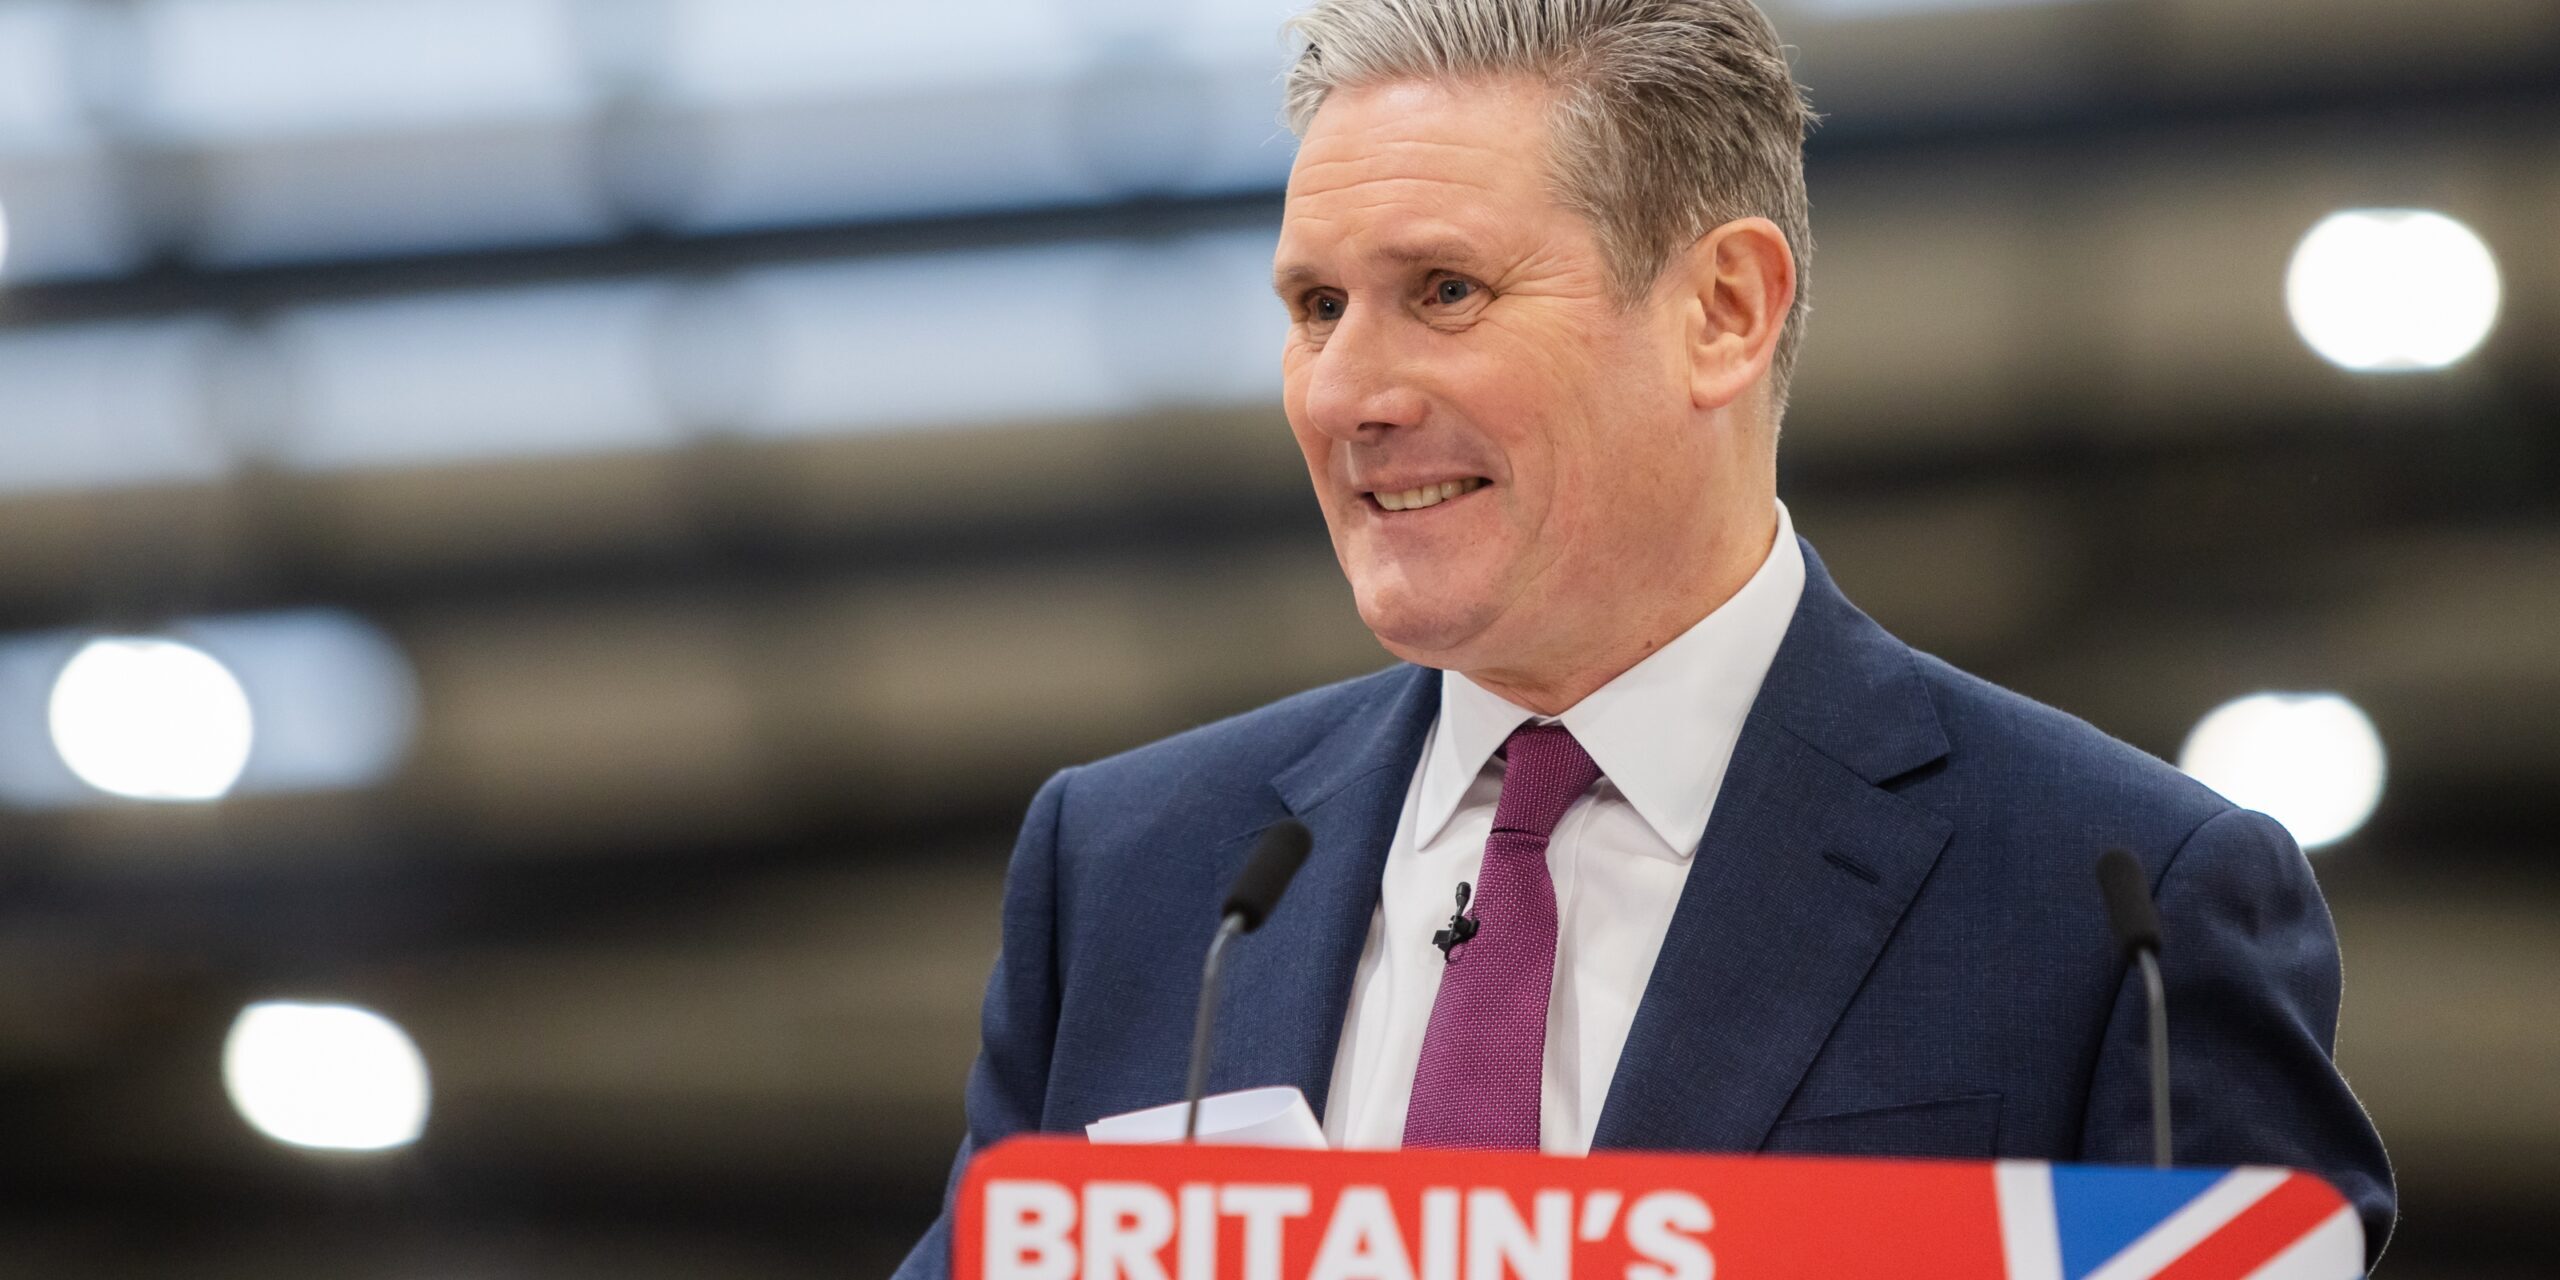 Keir Starmer smiling behind a podium that says 'Britain's Future' on it